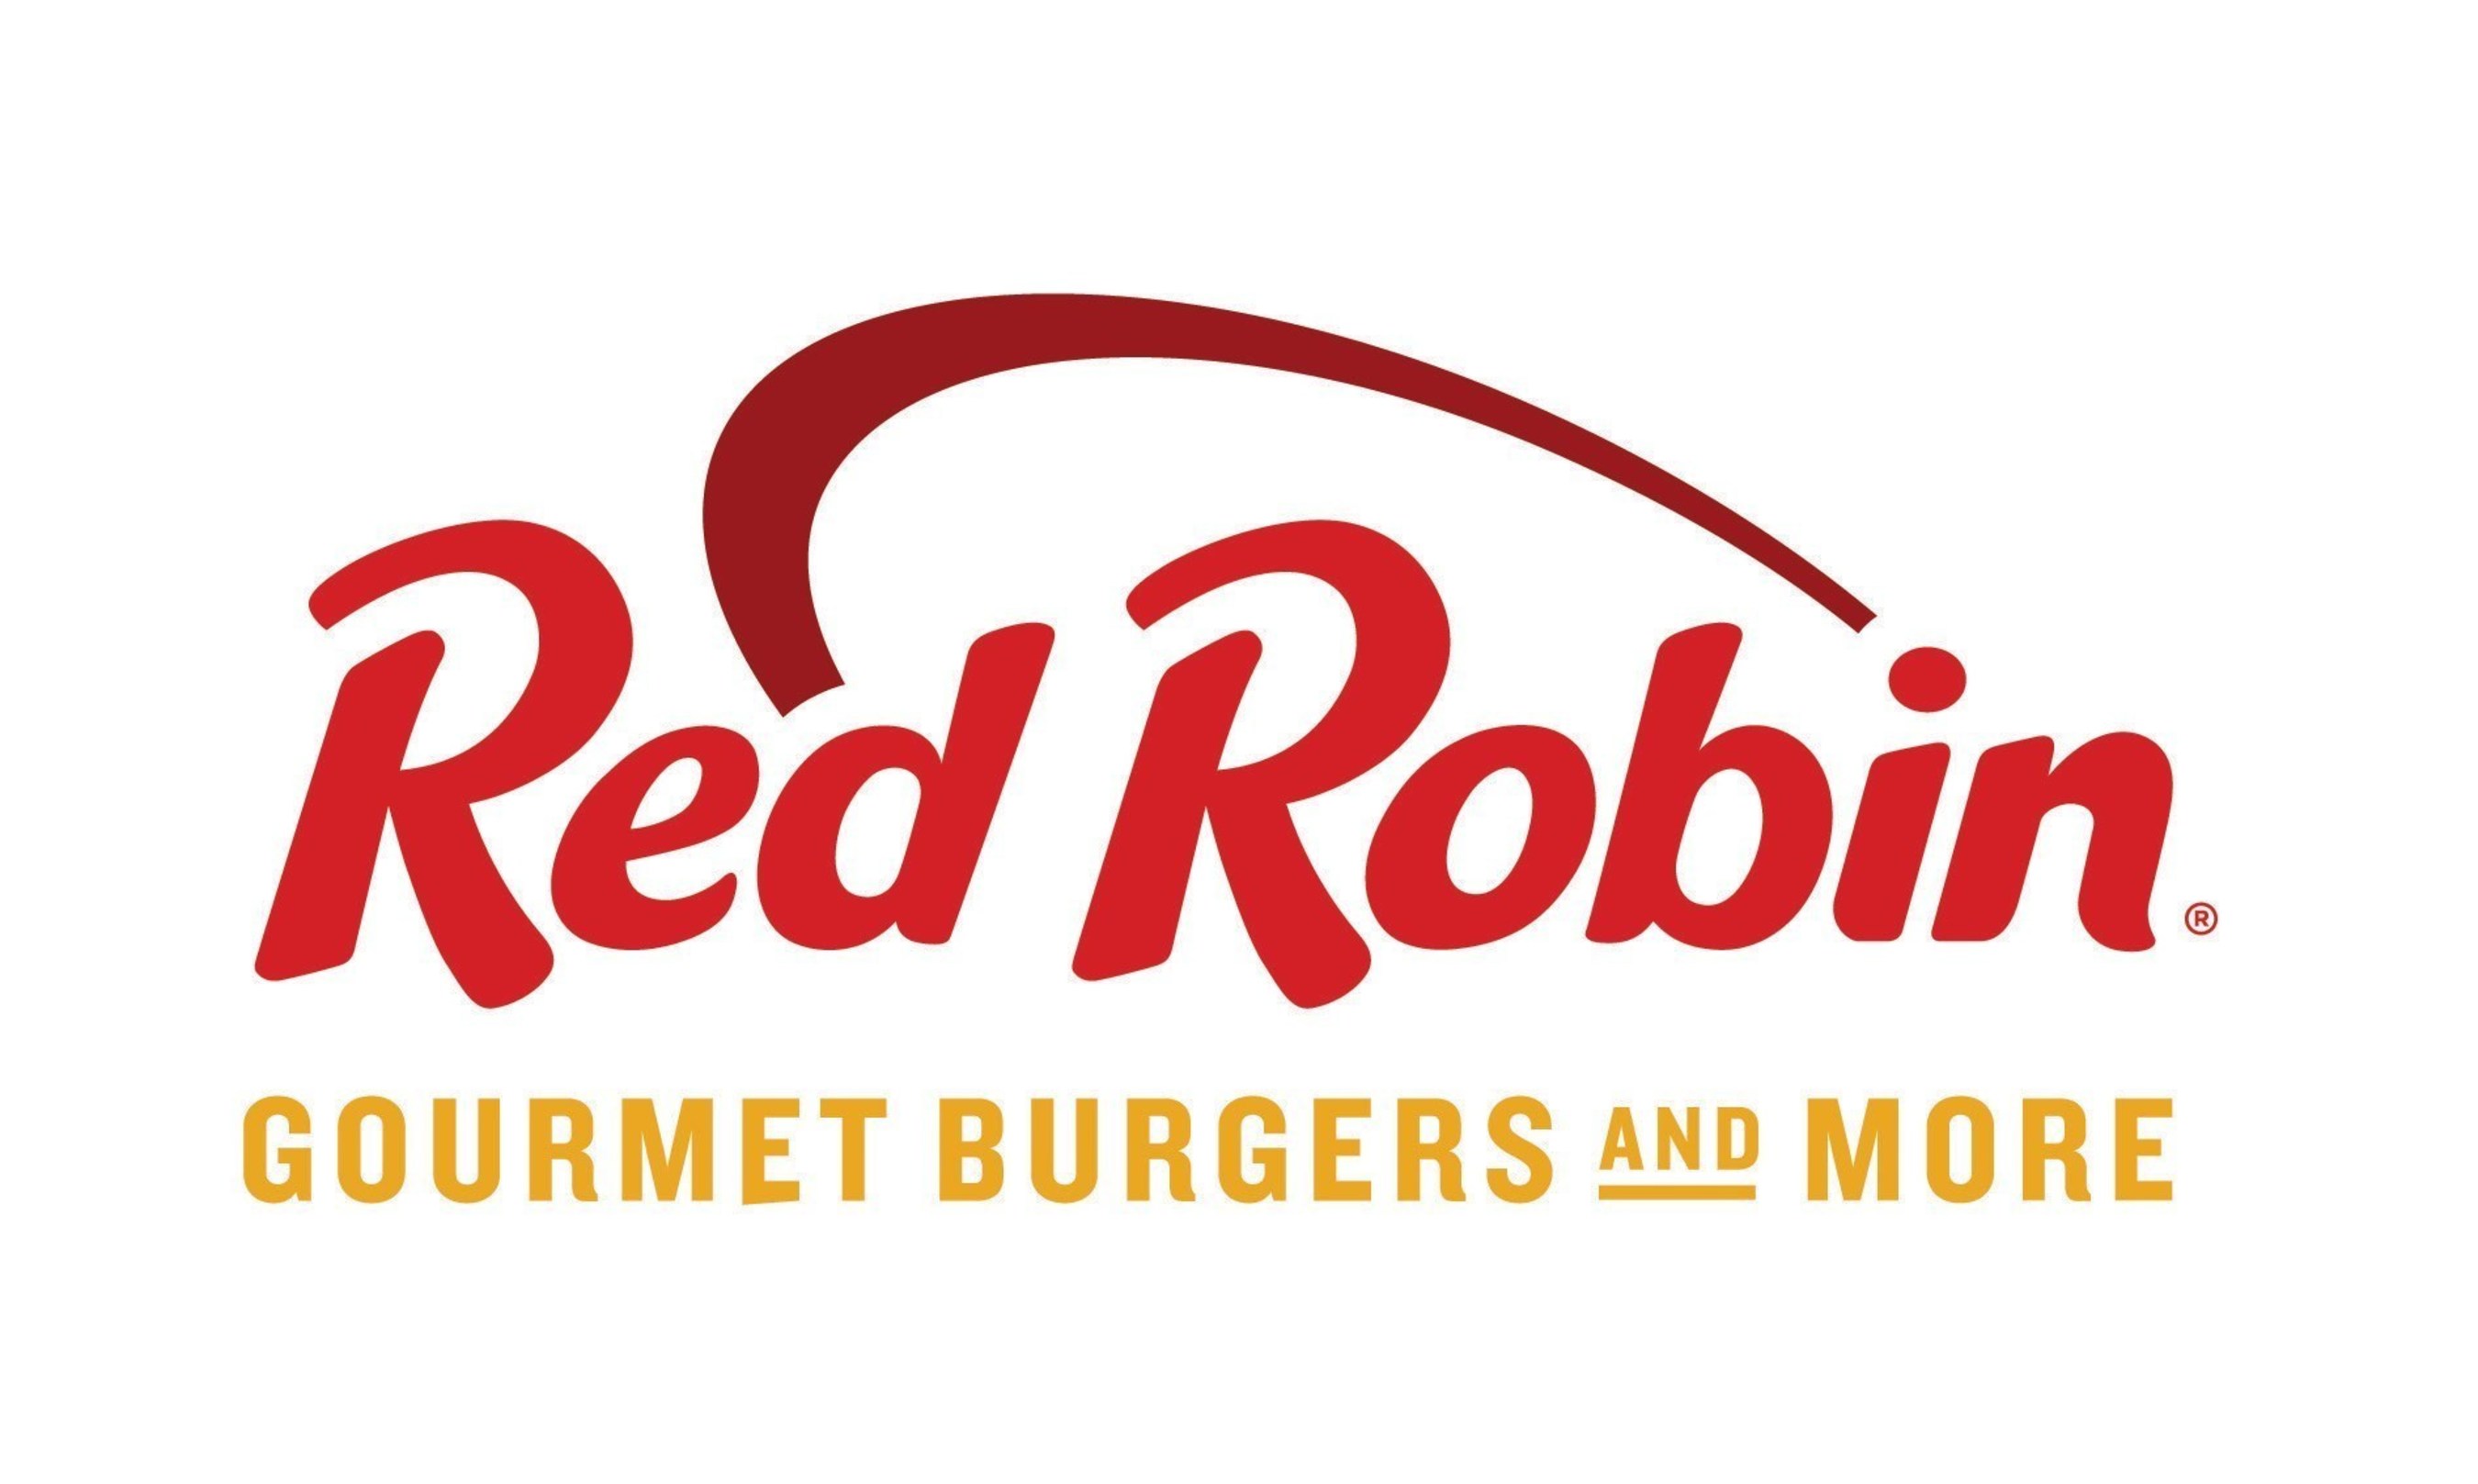 Red Robin Gourmet Burgers and More (PRNewsFoto/Red Robin Gourmet Burgers, Inc.)